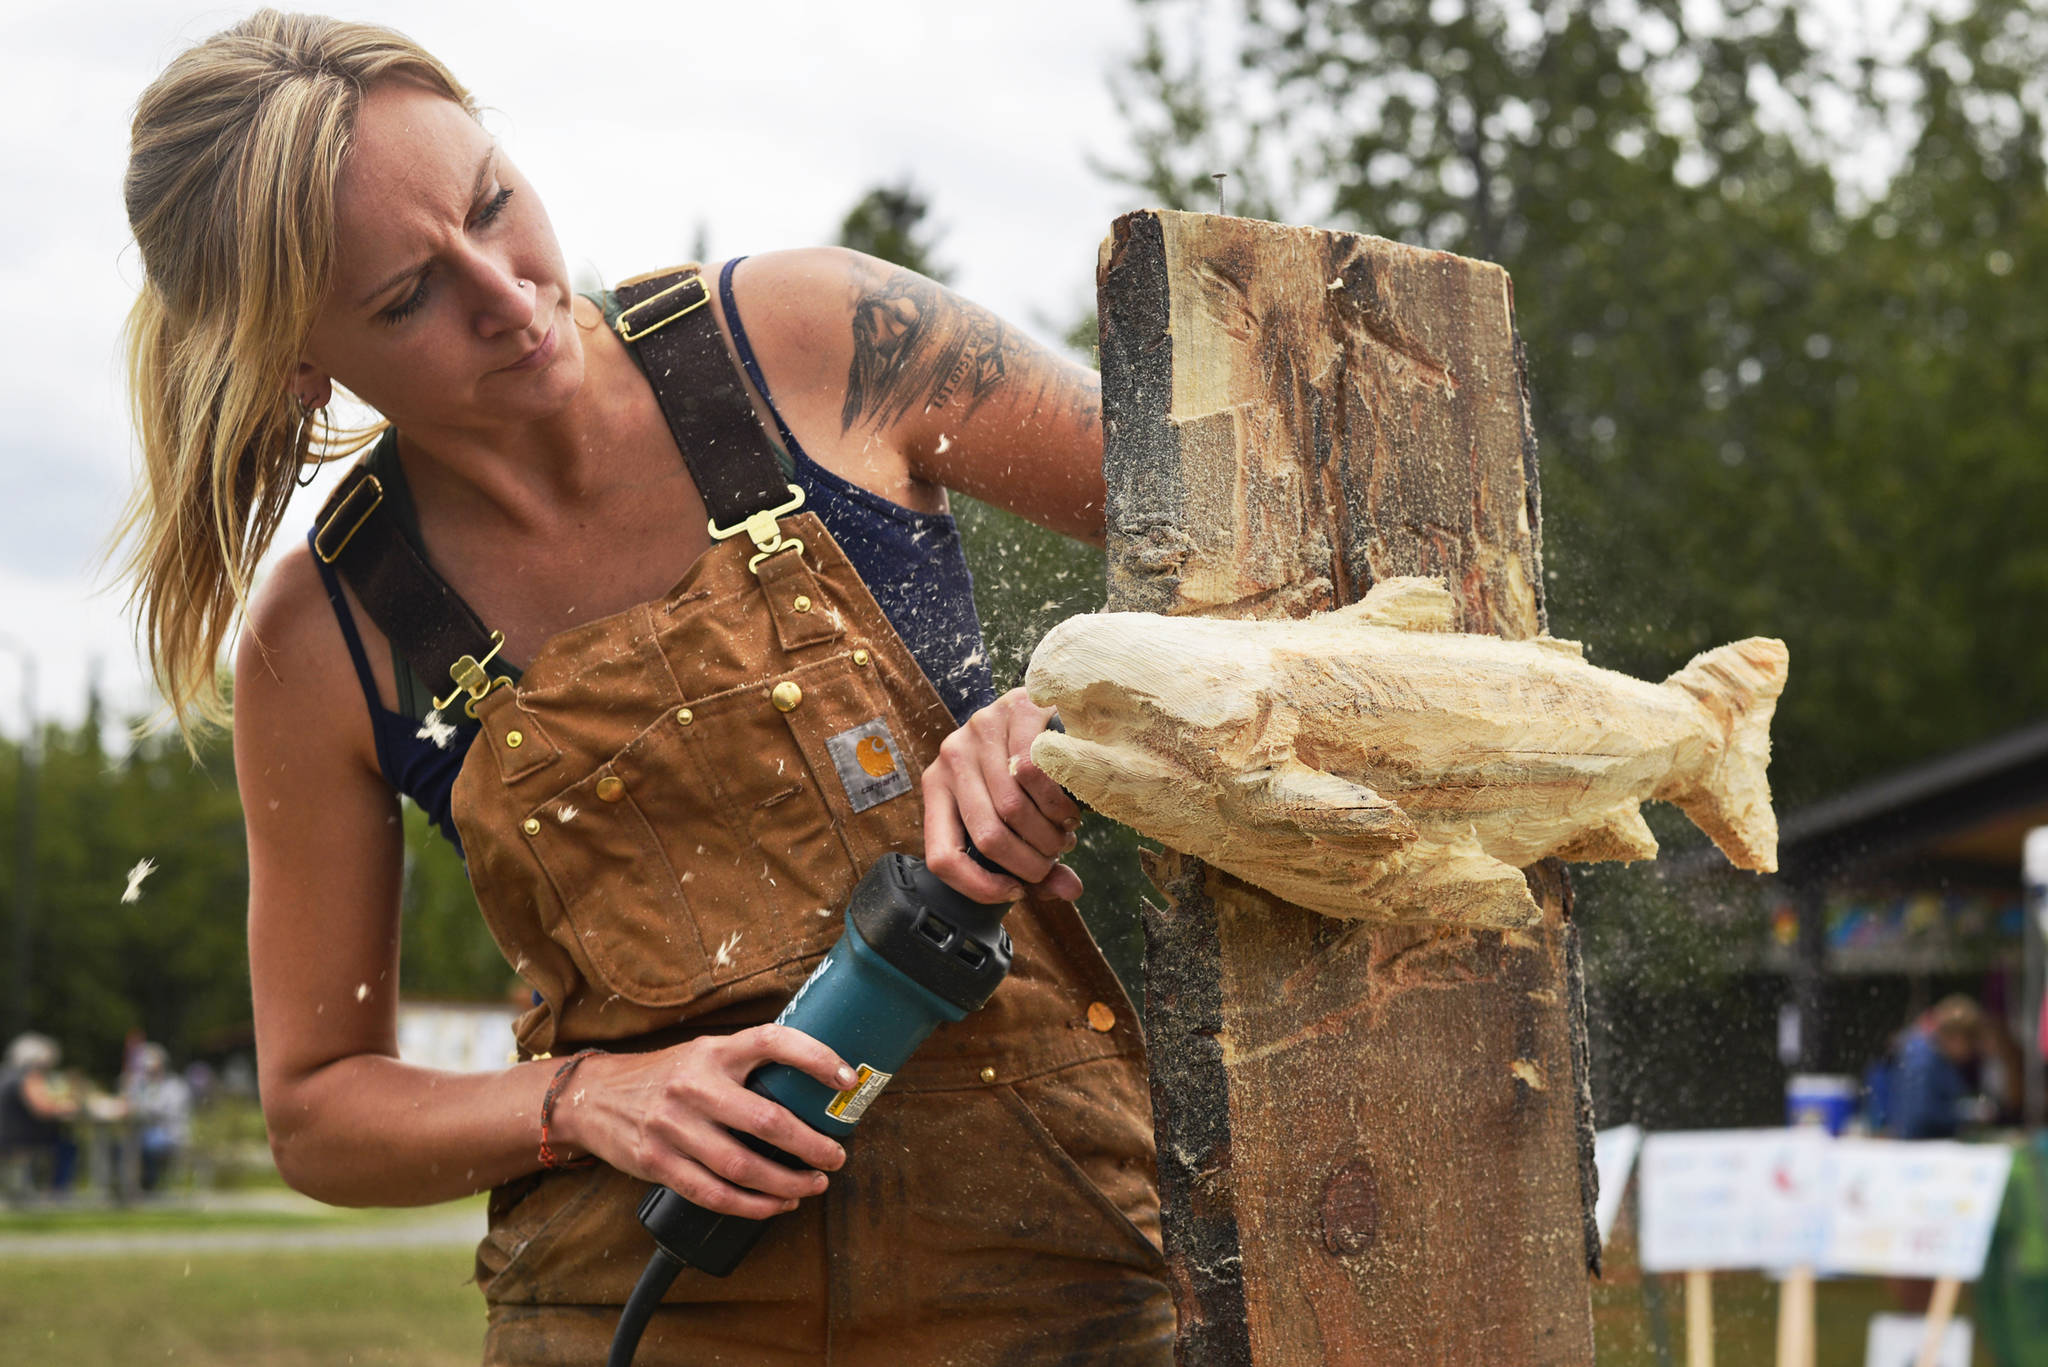 Sculptor Nichole Hoop works on a carving during the Alaska Wild Salmon Day festivities in Soldotna Creek Park on Friday in Soldotna. The event, organized by the conservation nonprofit Cook Inletkeeper, featured salmon-themed art, servings of salmon chowder, readings by fisher-poets, and music by Tyson James and Motown Fever. (Ben Boettger/Peninsula Clarion)